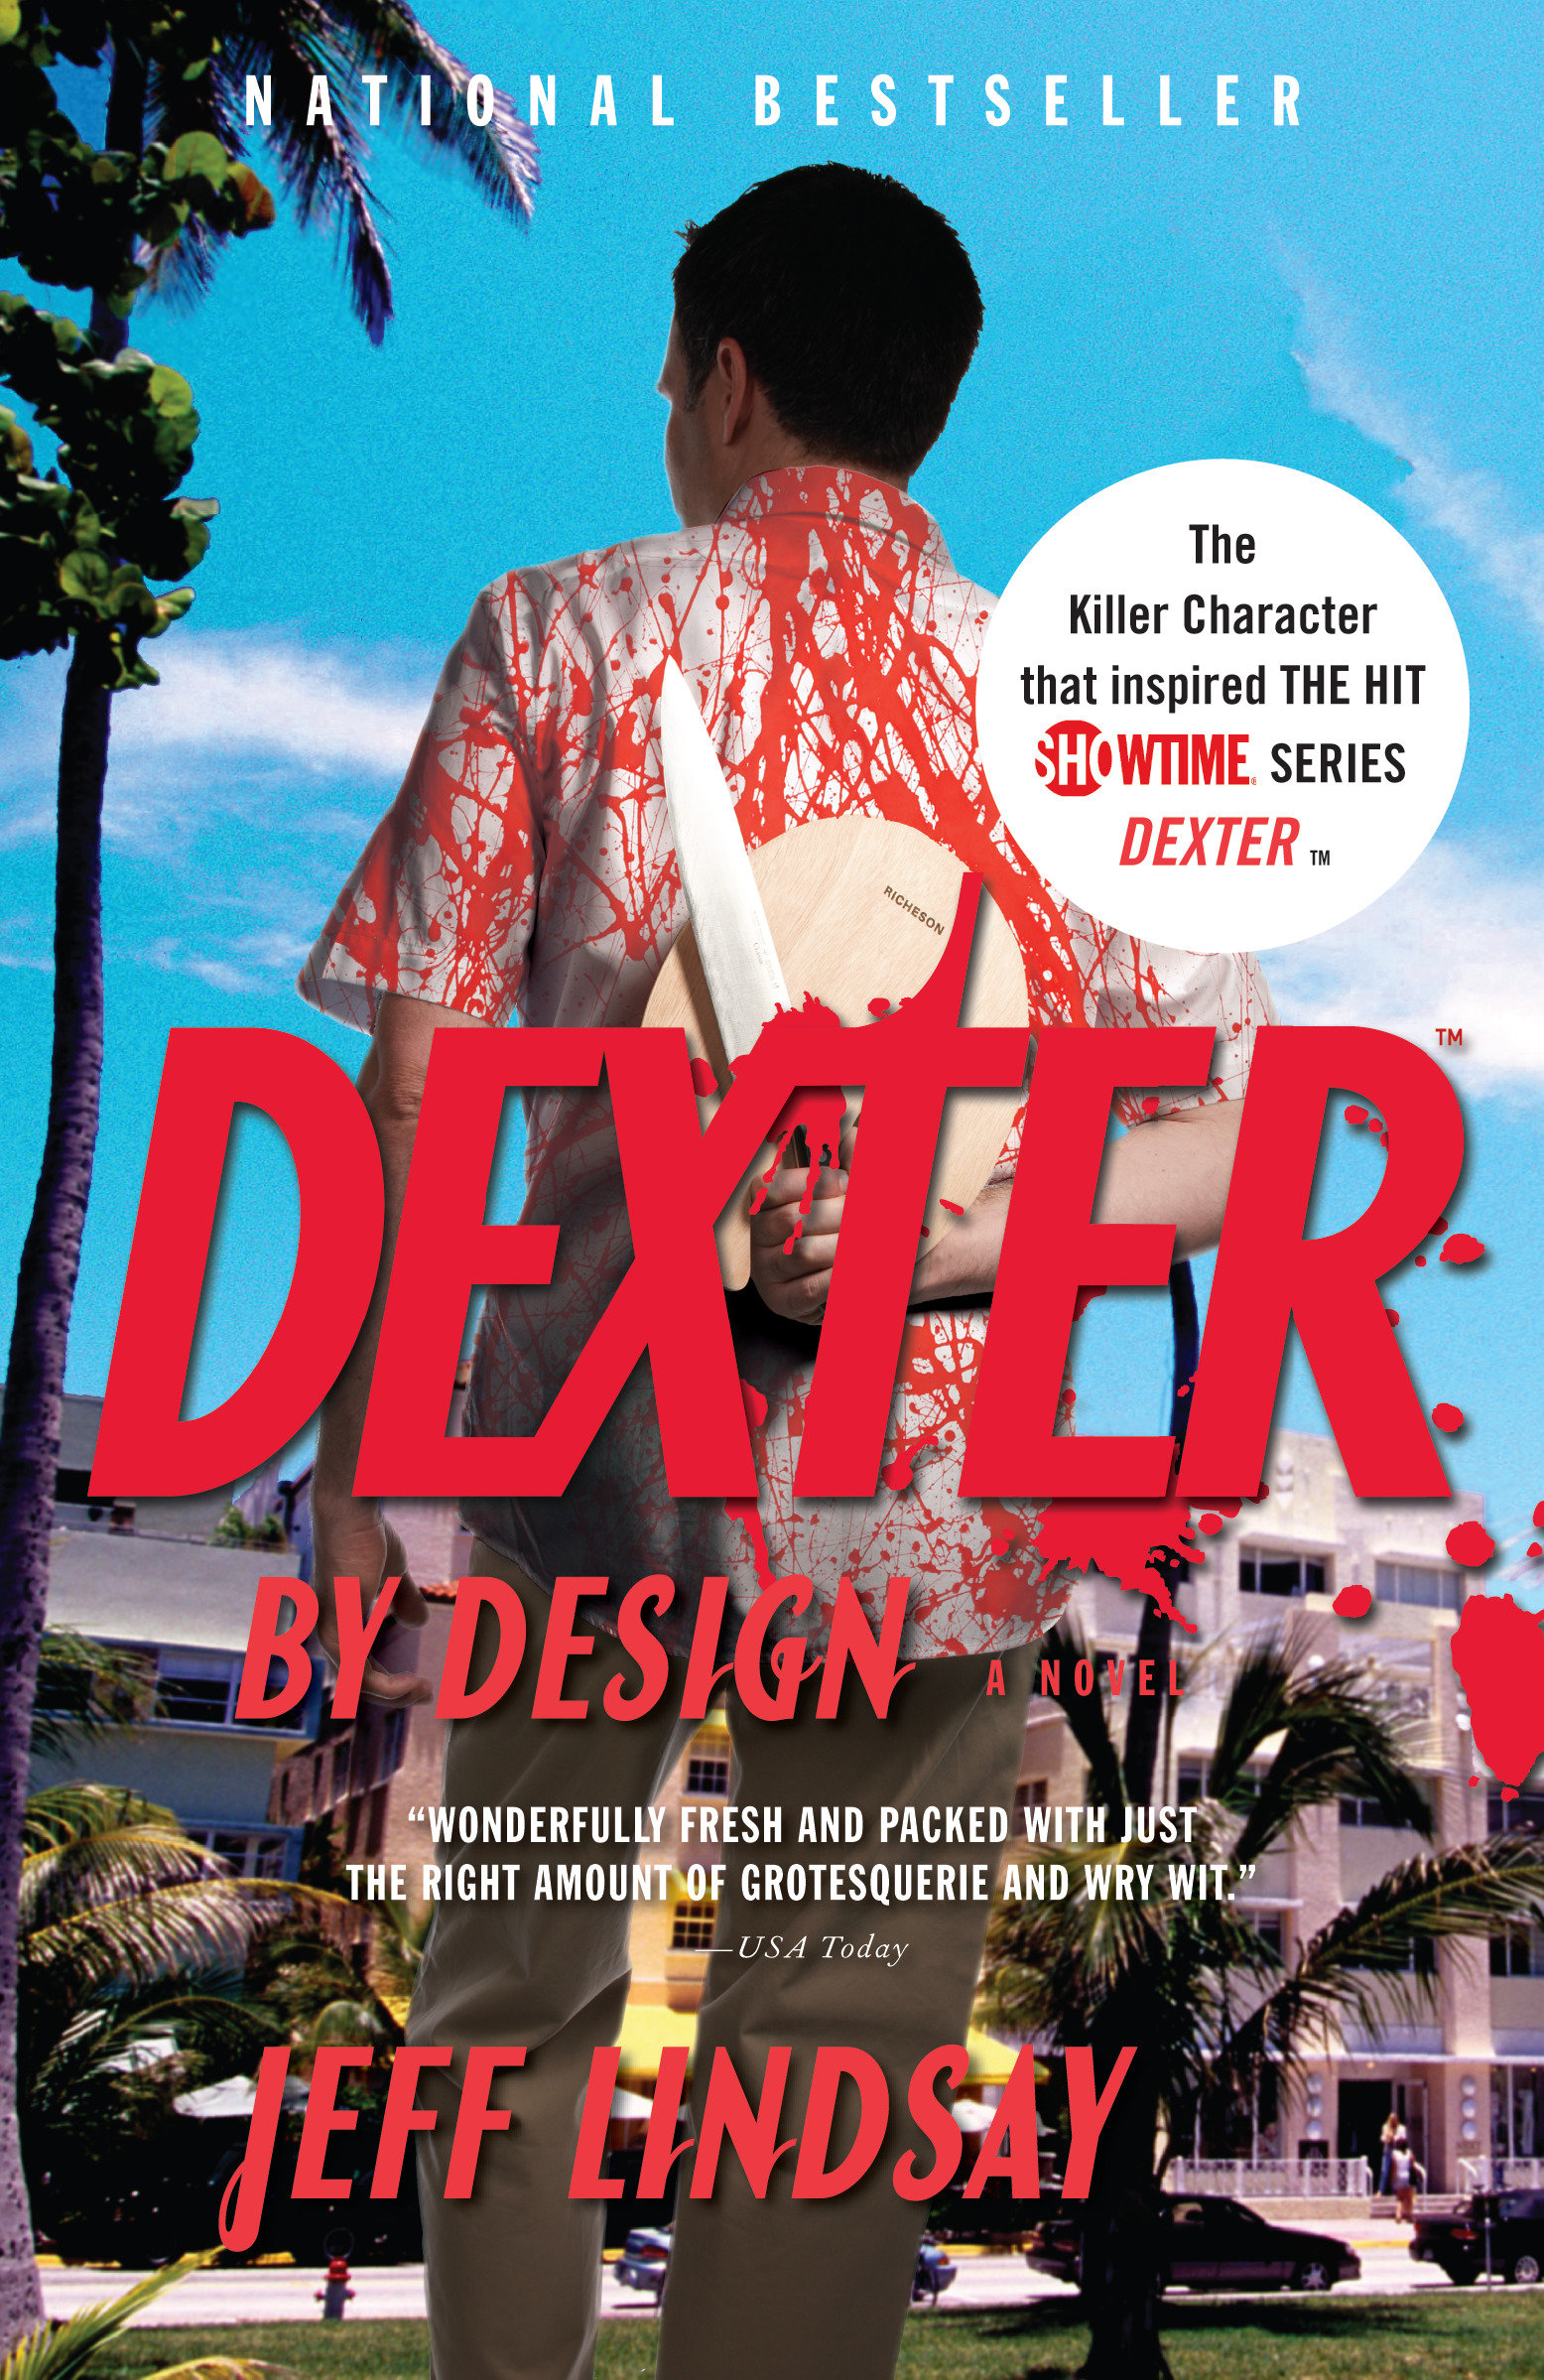 Dexter by design cover image